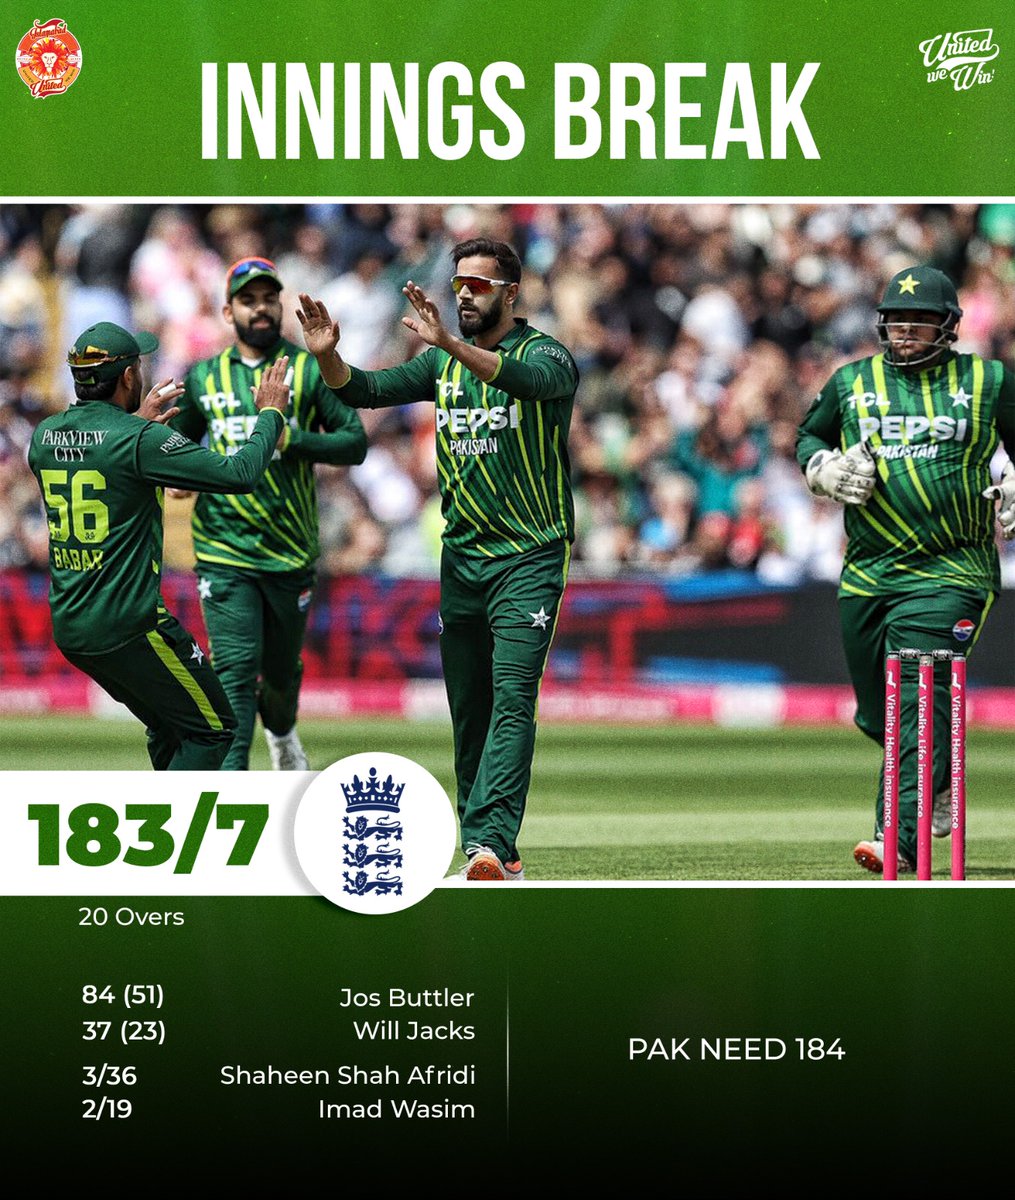 What a fightback by Pakistan! Imad Wasim's 2/19 and Shaheen Afridi's three wickets helped restrict England to 183/7 after they looked set for 200+. Let's chase the target! 🙌 #ENGvPAK #UnitedForPakistan #UnitedWeWin